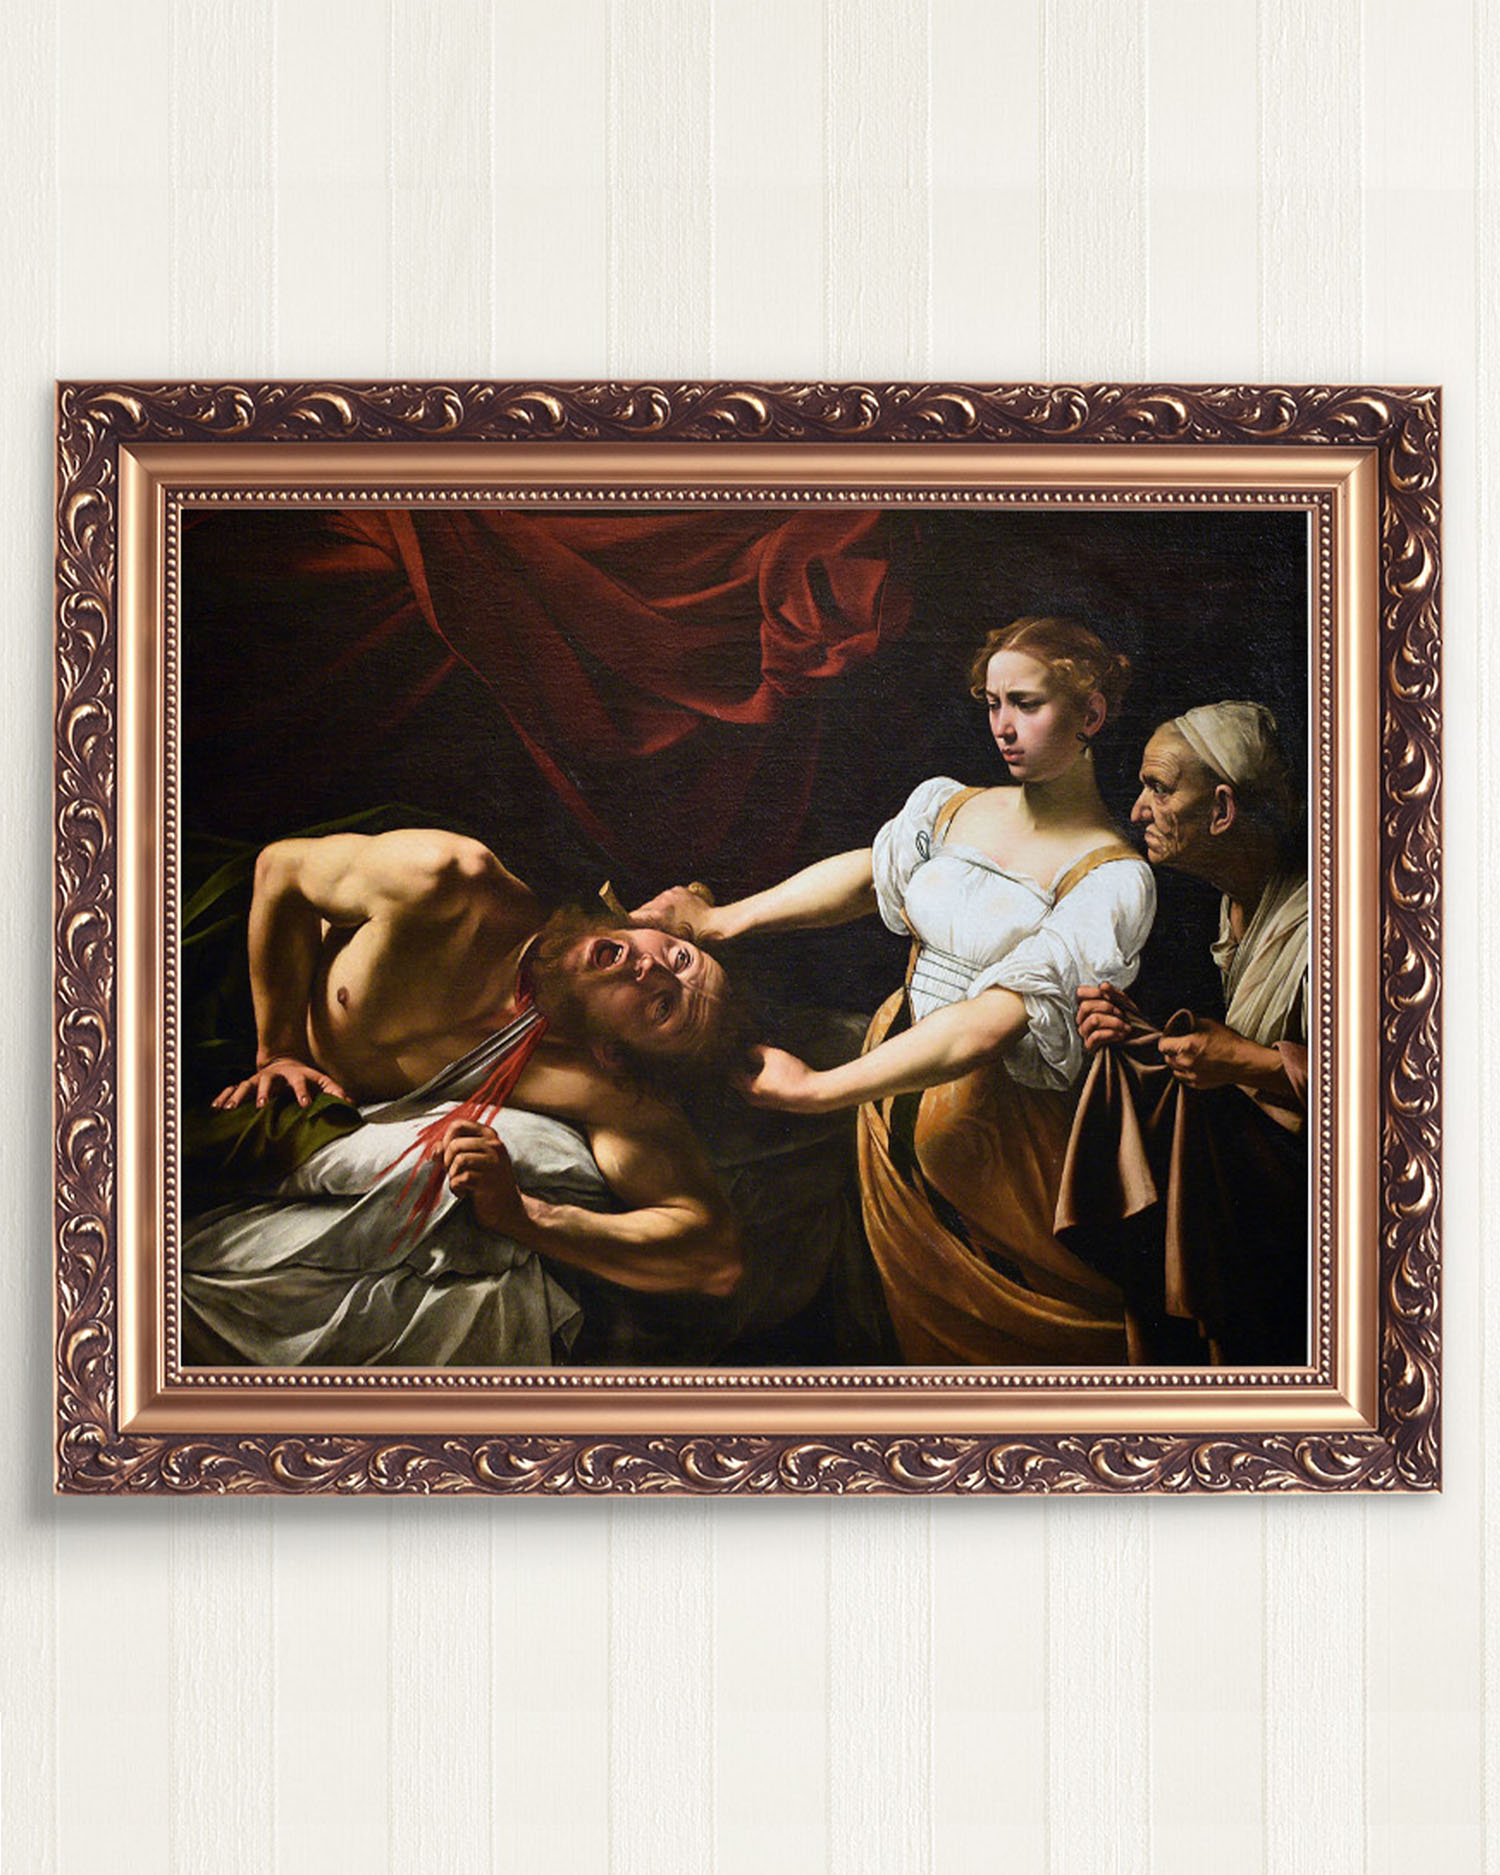 image in a frame of judith beheading holofernes, 1599 by caravaggio